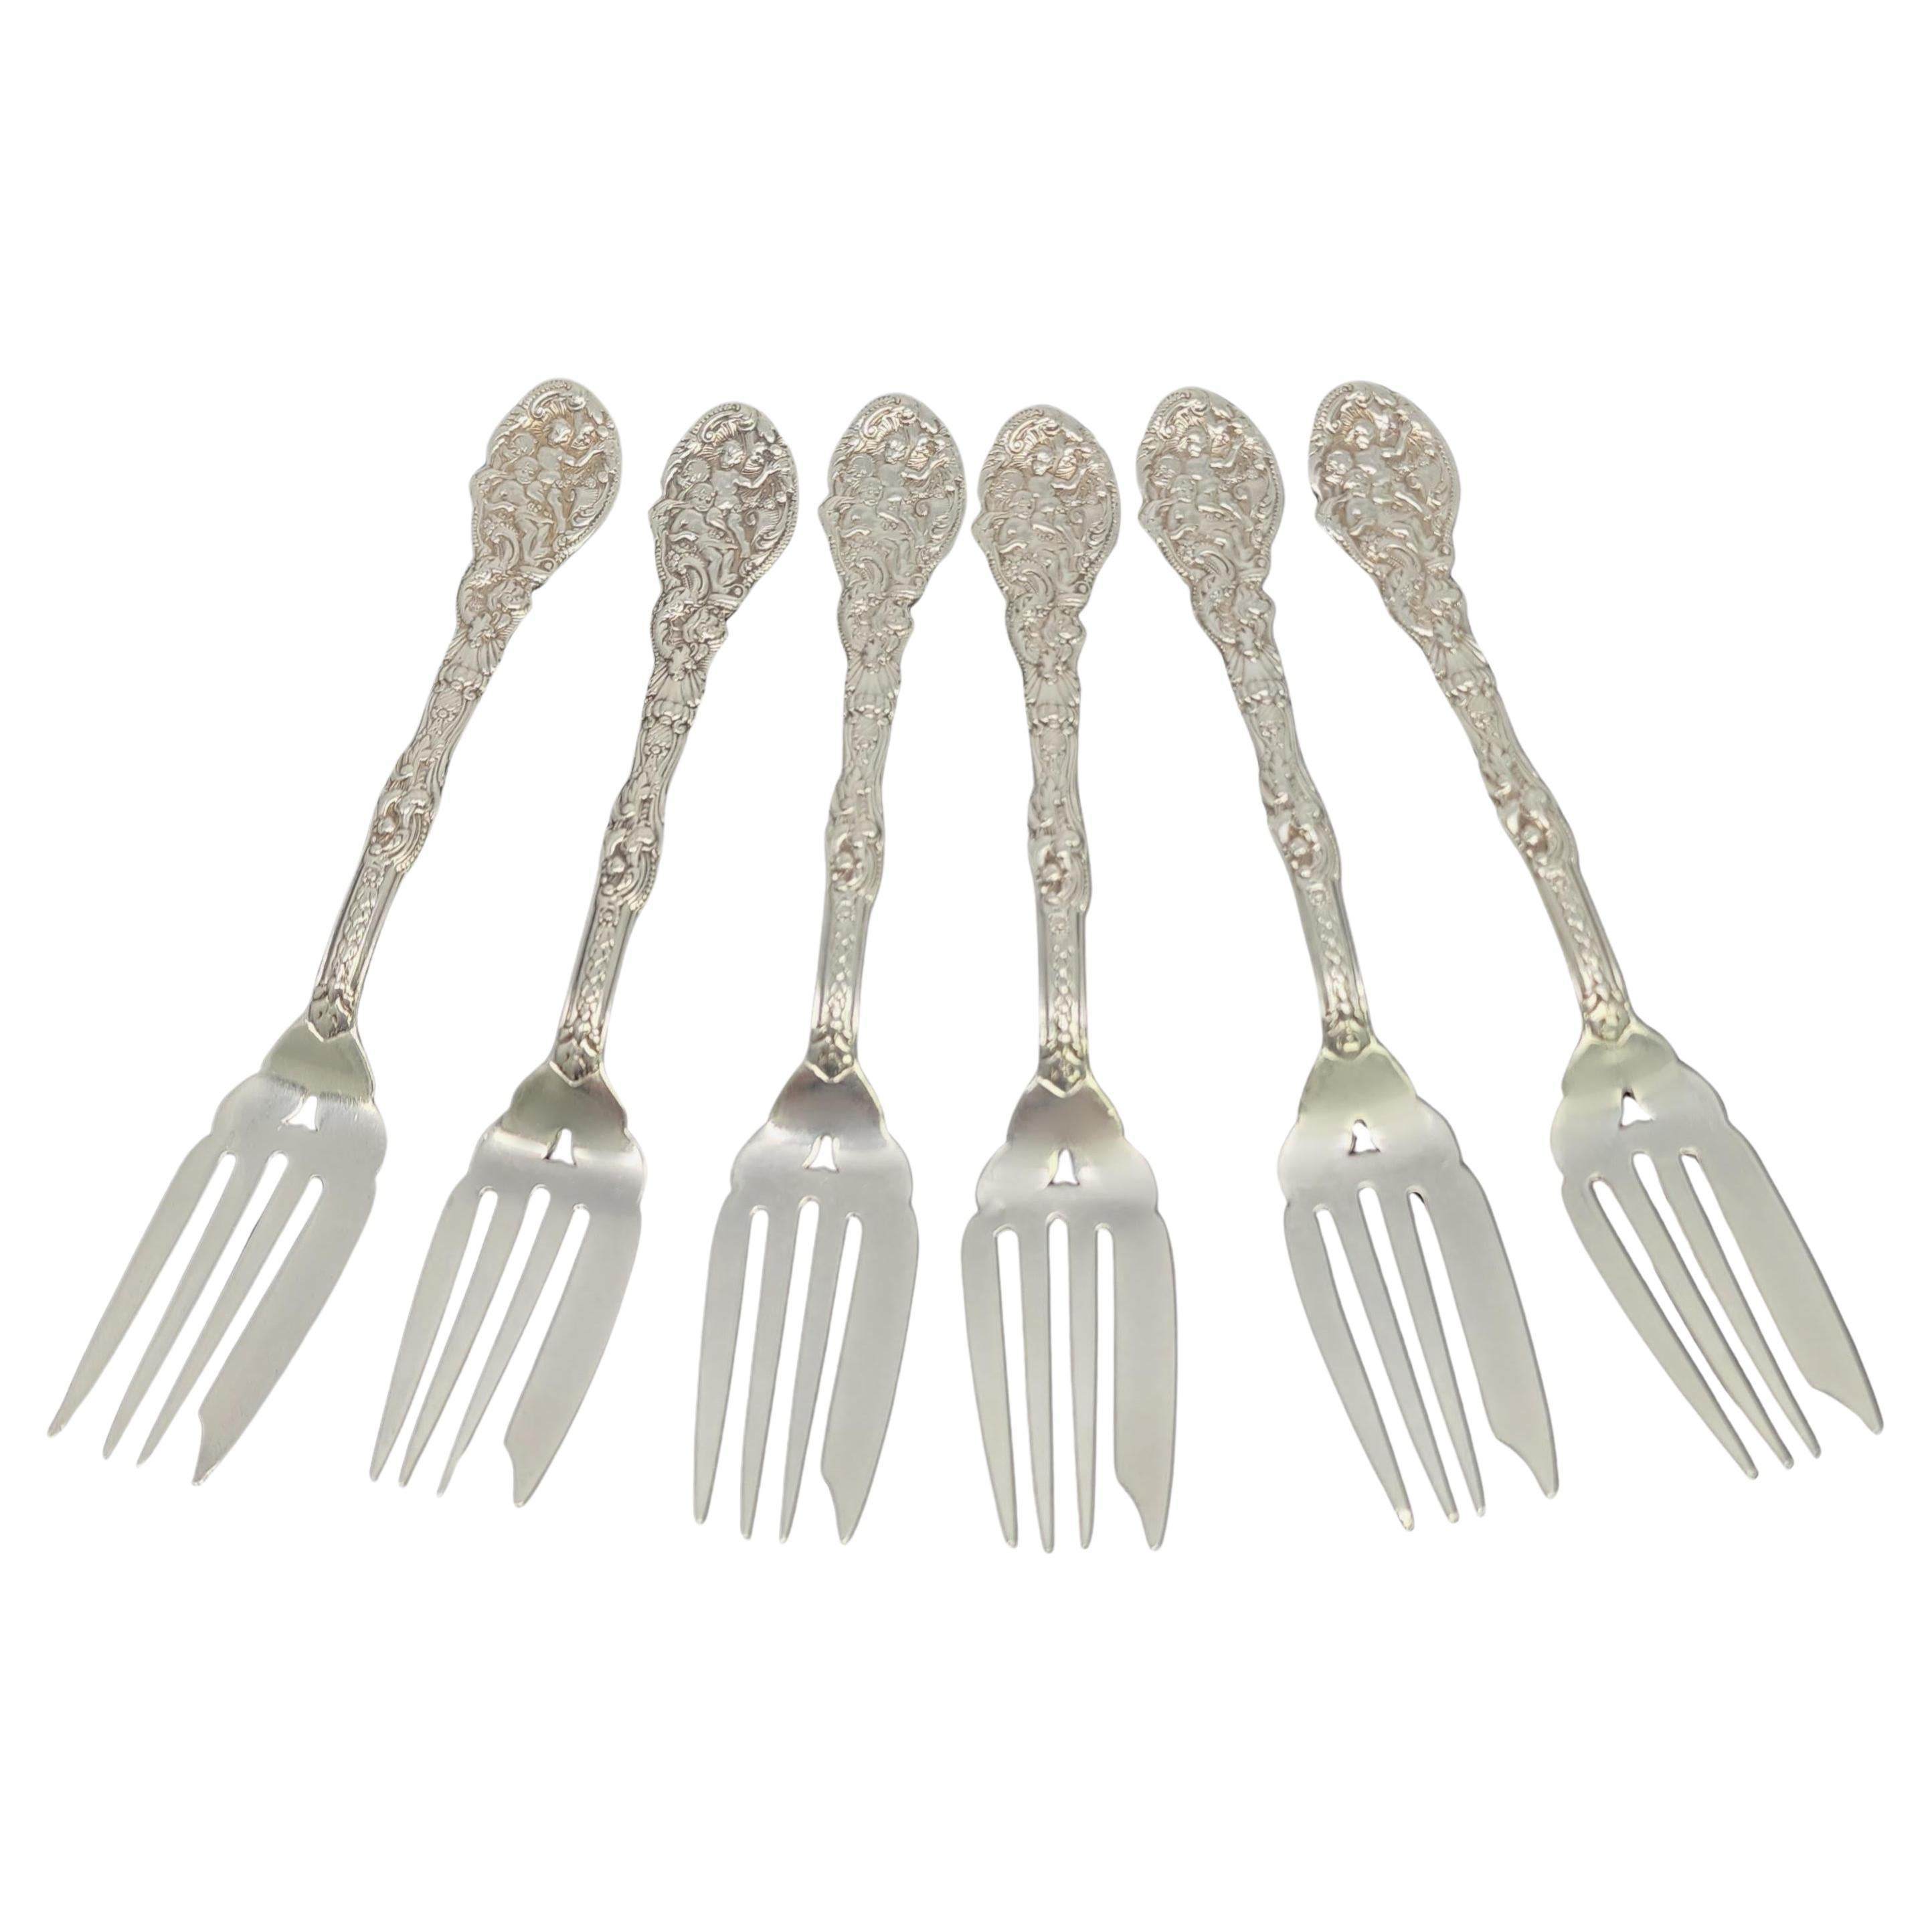 Set of 6 Gorham Versailles Sterling Silver Pastry Forks 6" w/Mono #17144